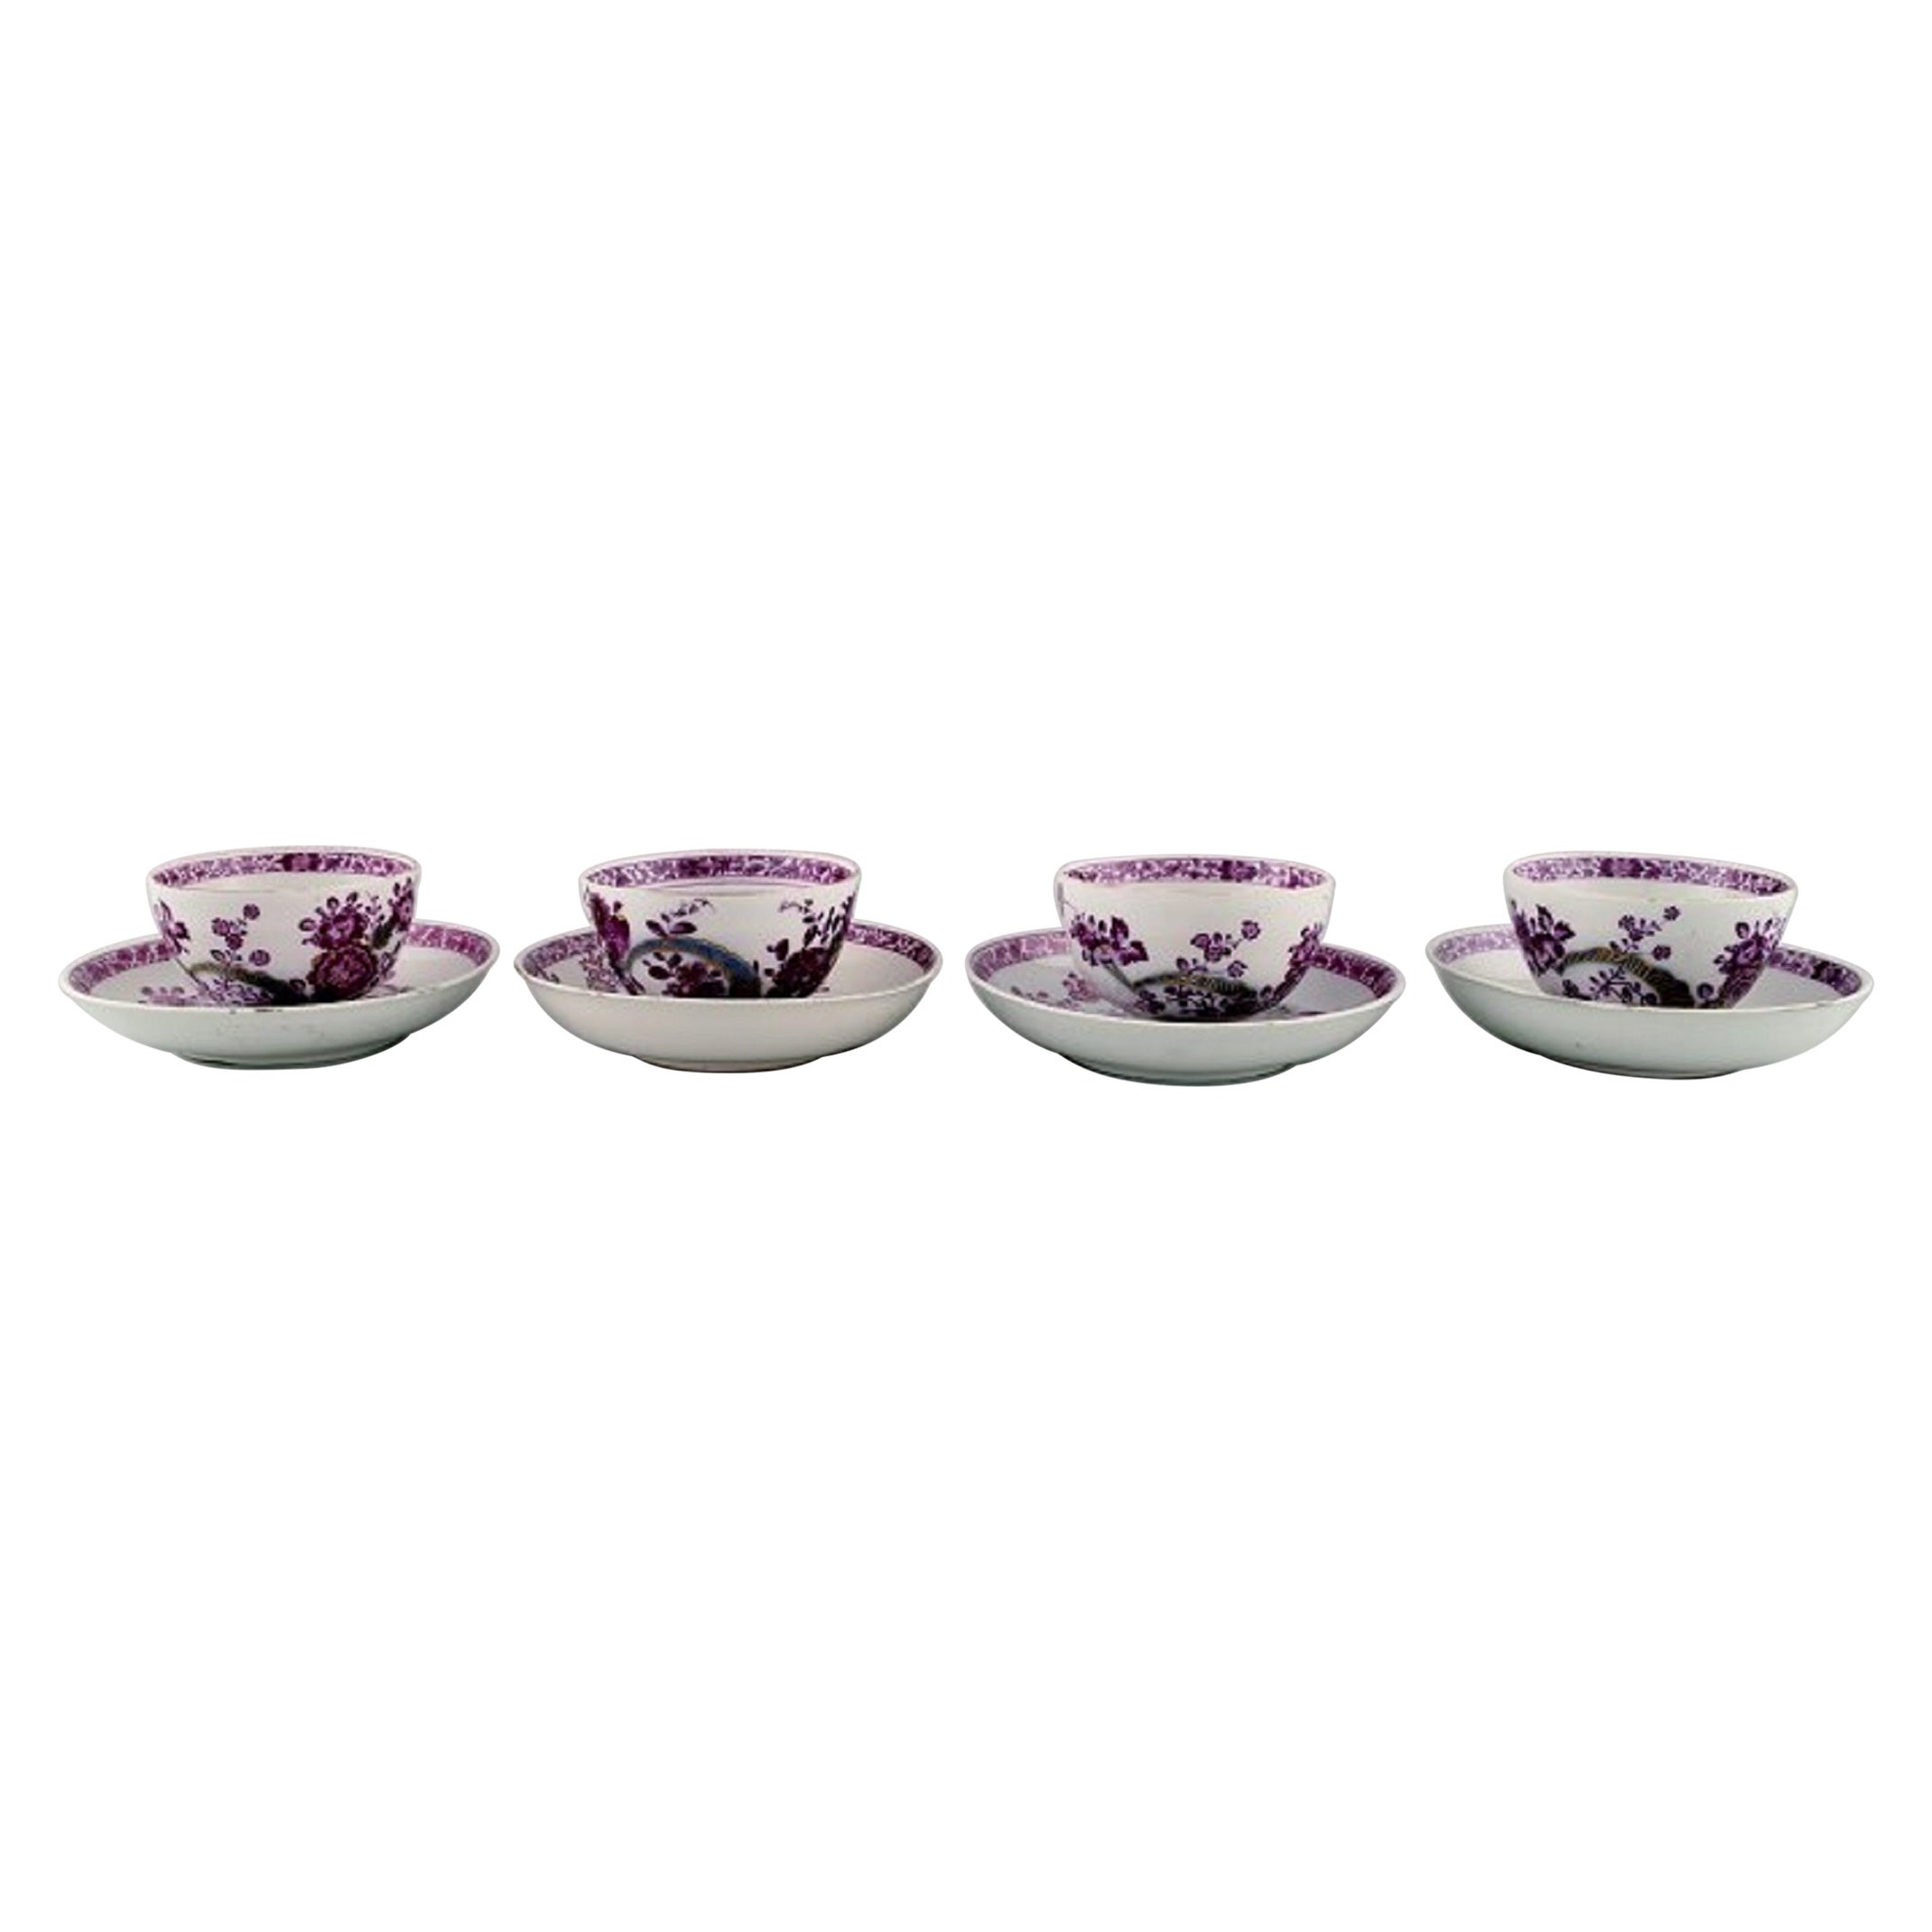 Four Antique Meissen Teacups with Saucers in Hand-Painted Porcelain